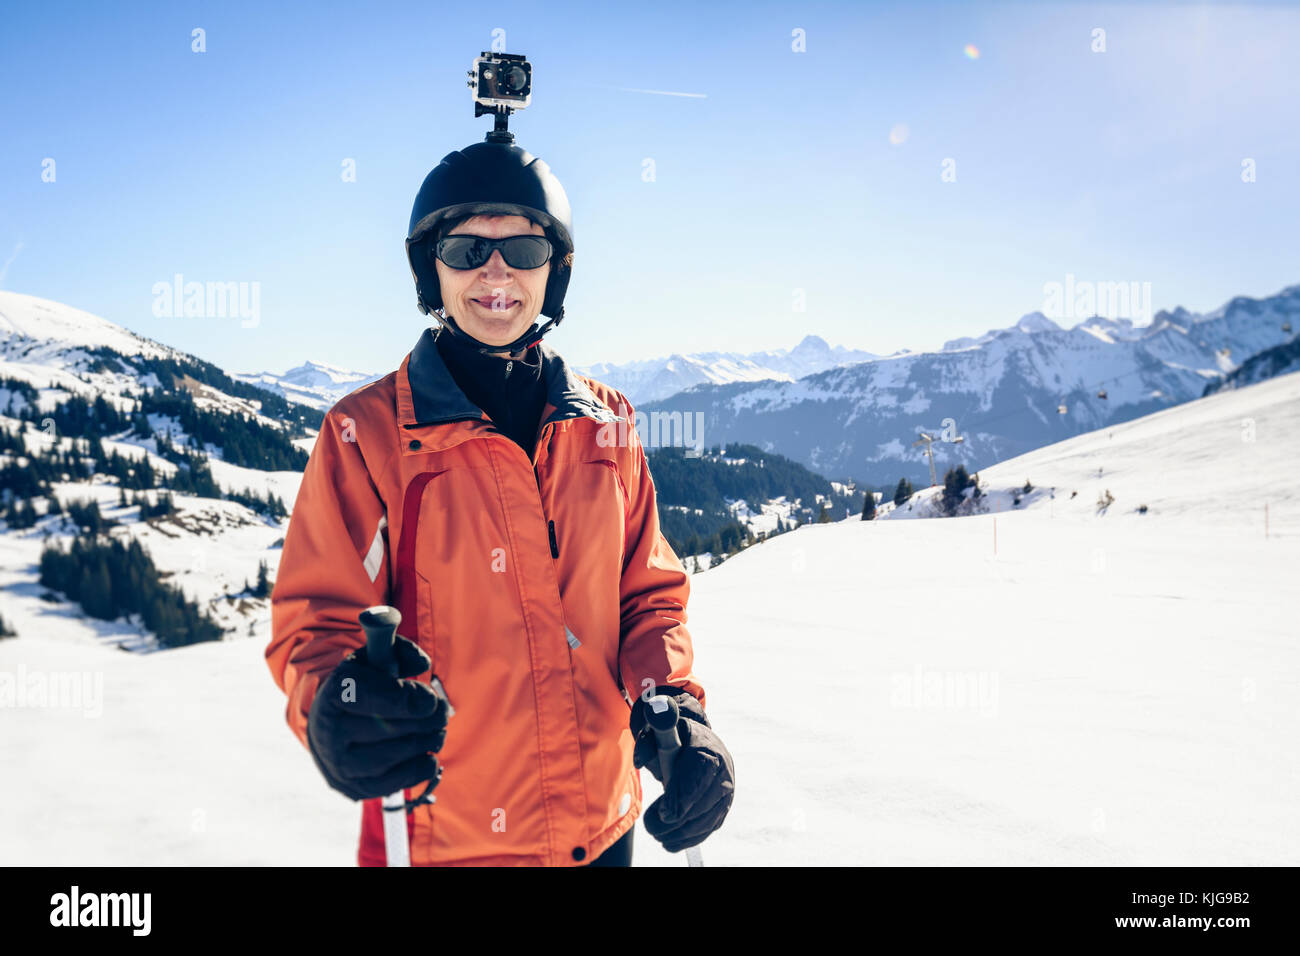 Austria, Damuels, skier with action cam in winter landscape Stock Photo